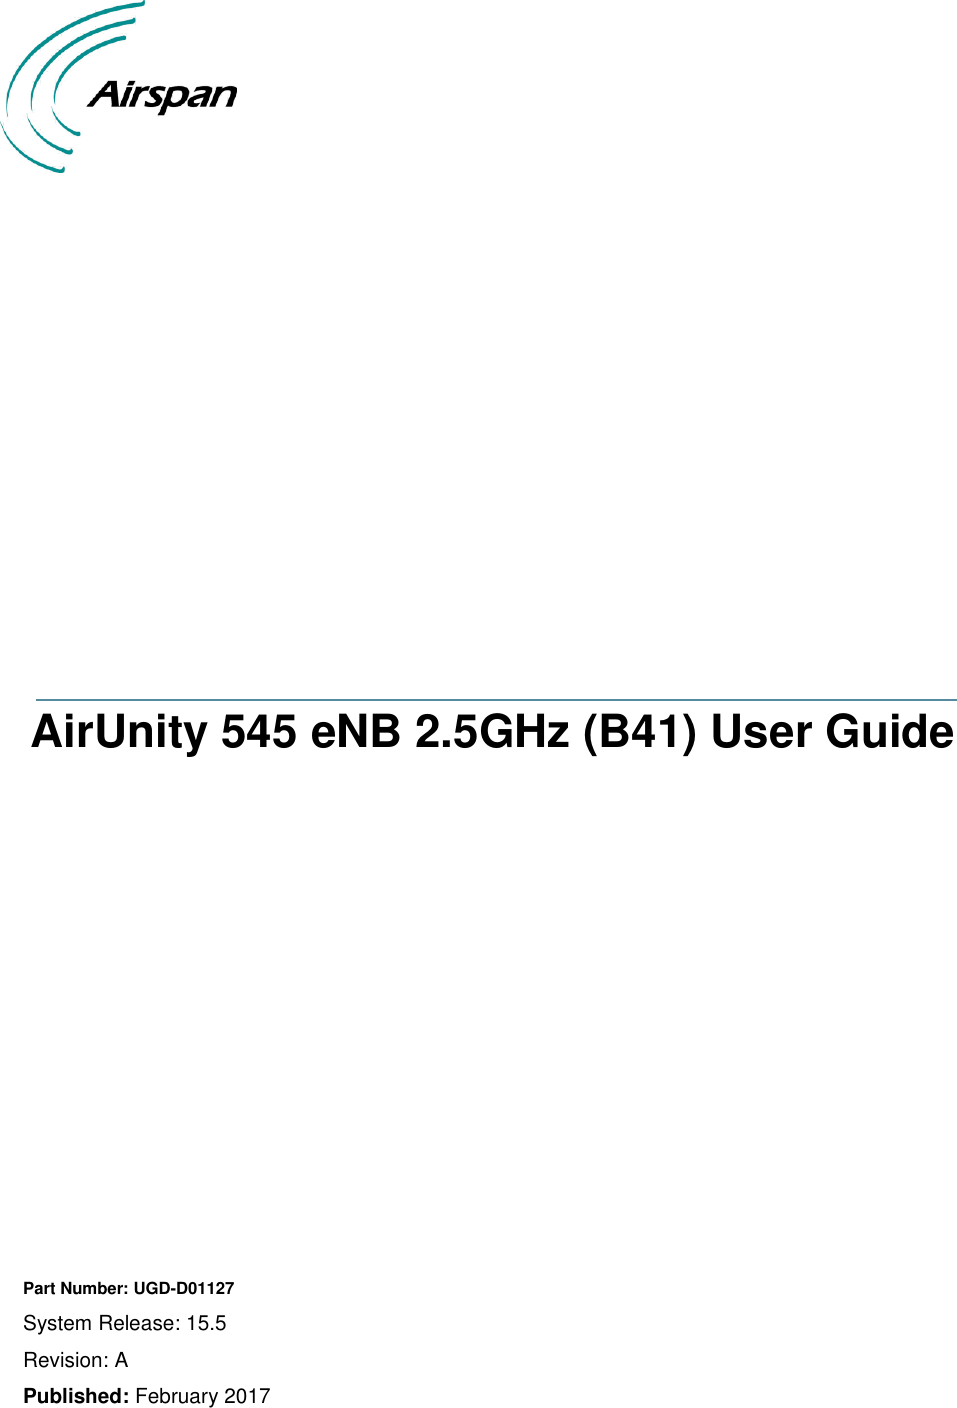                       AirUnity 545 eNB 2.5GHz (B41) User Guide                Part Number: UGD-D01127 System Release: 15.5 Revision: A Published: February 2017  